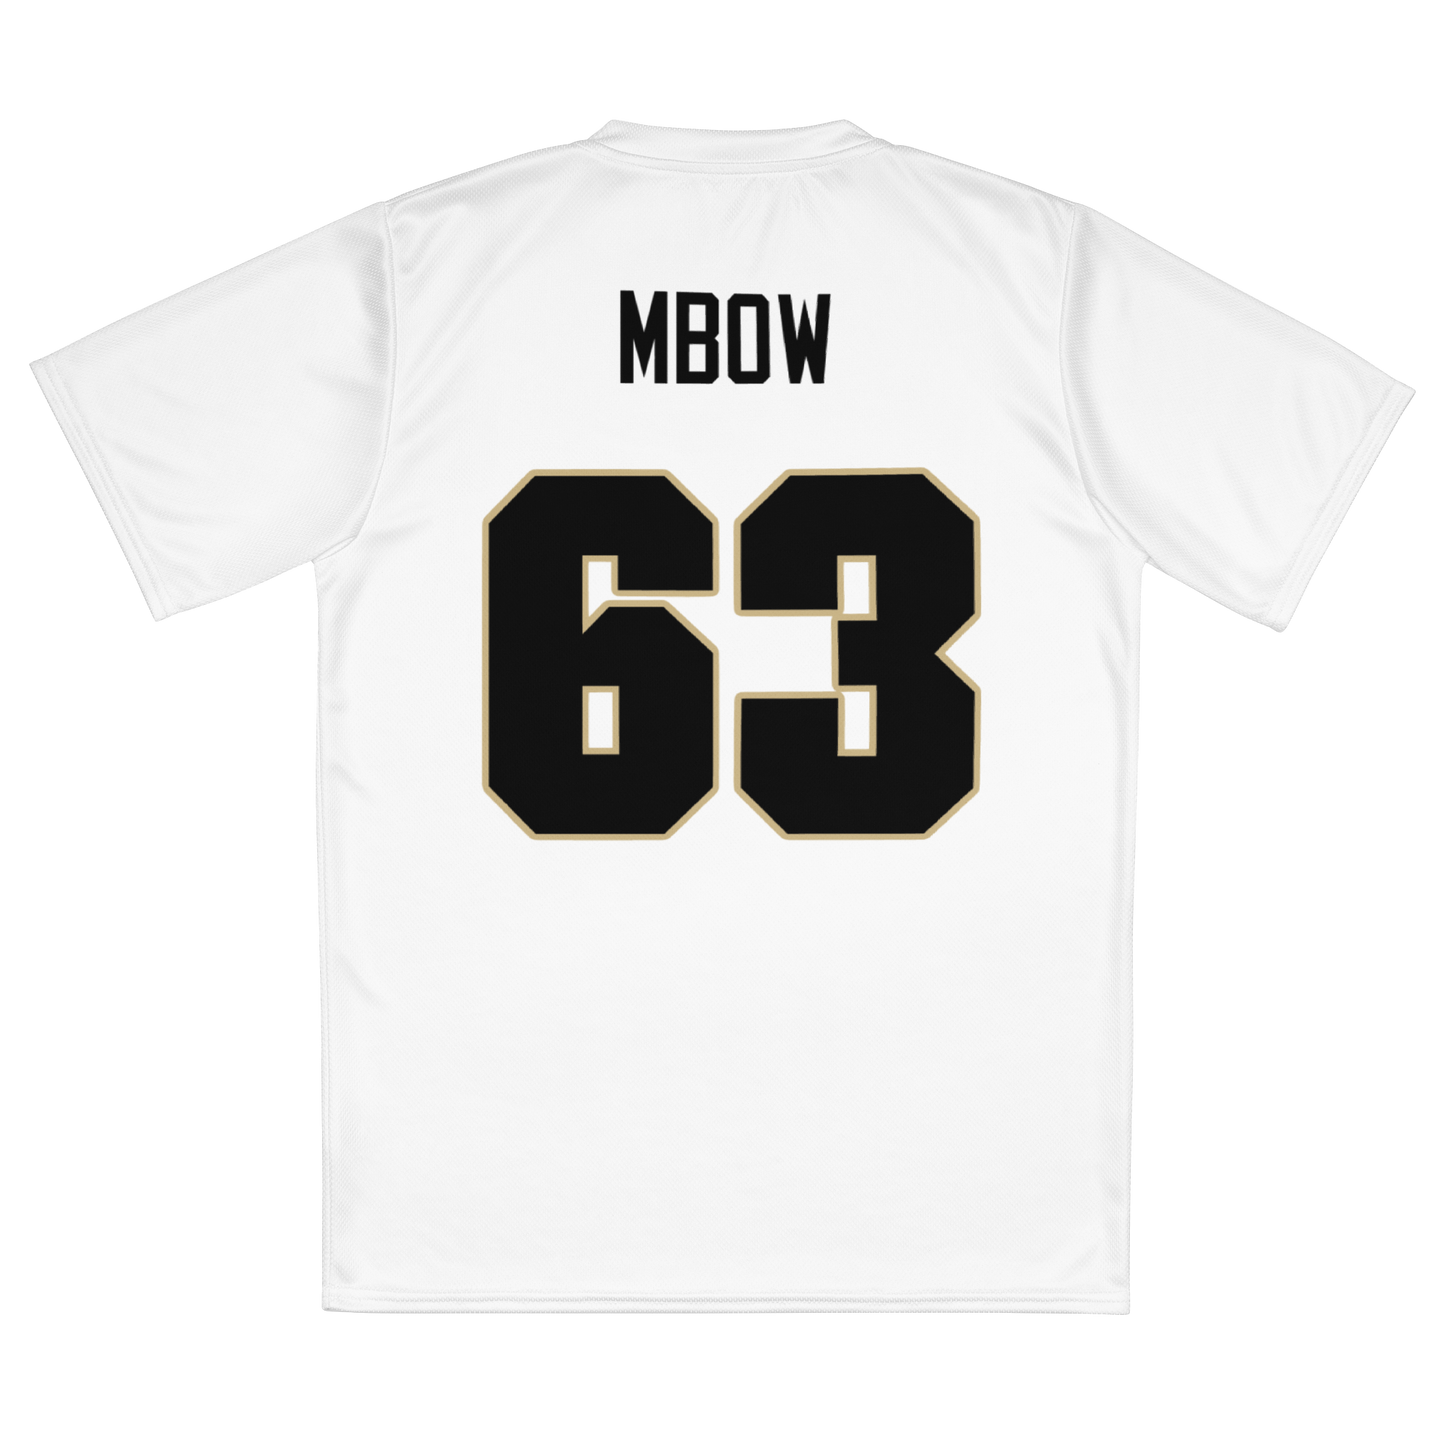 MBOW AWAY SHIRTSY